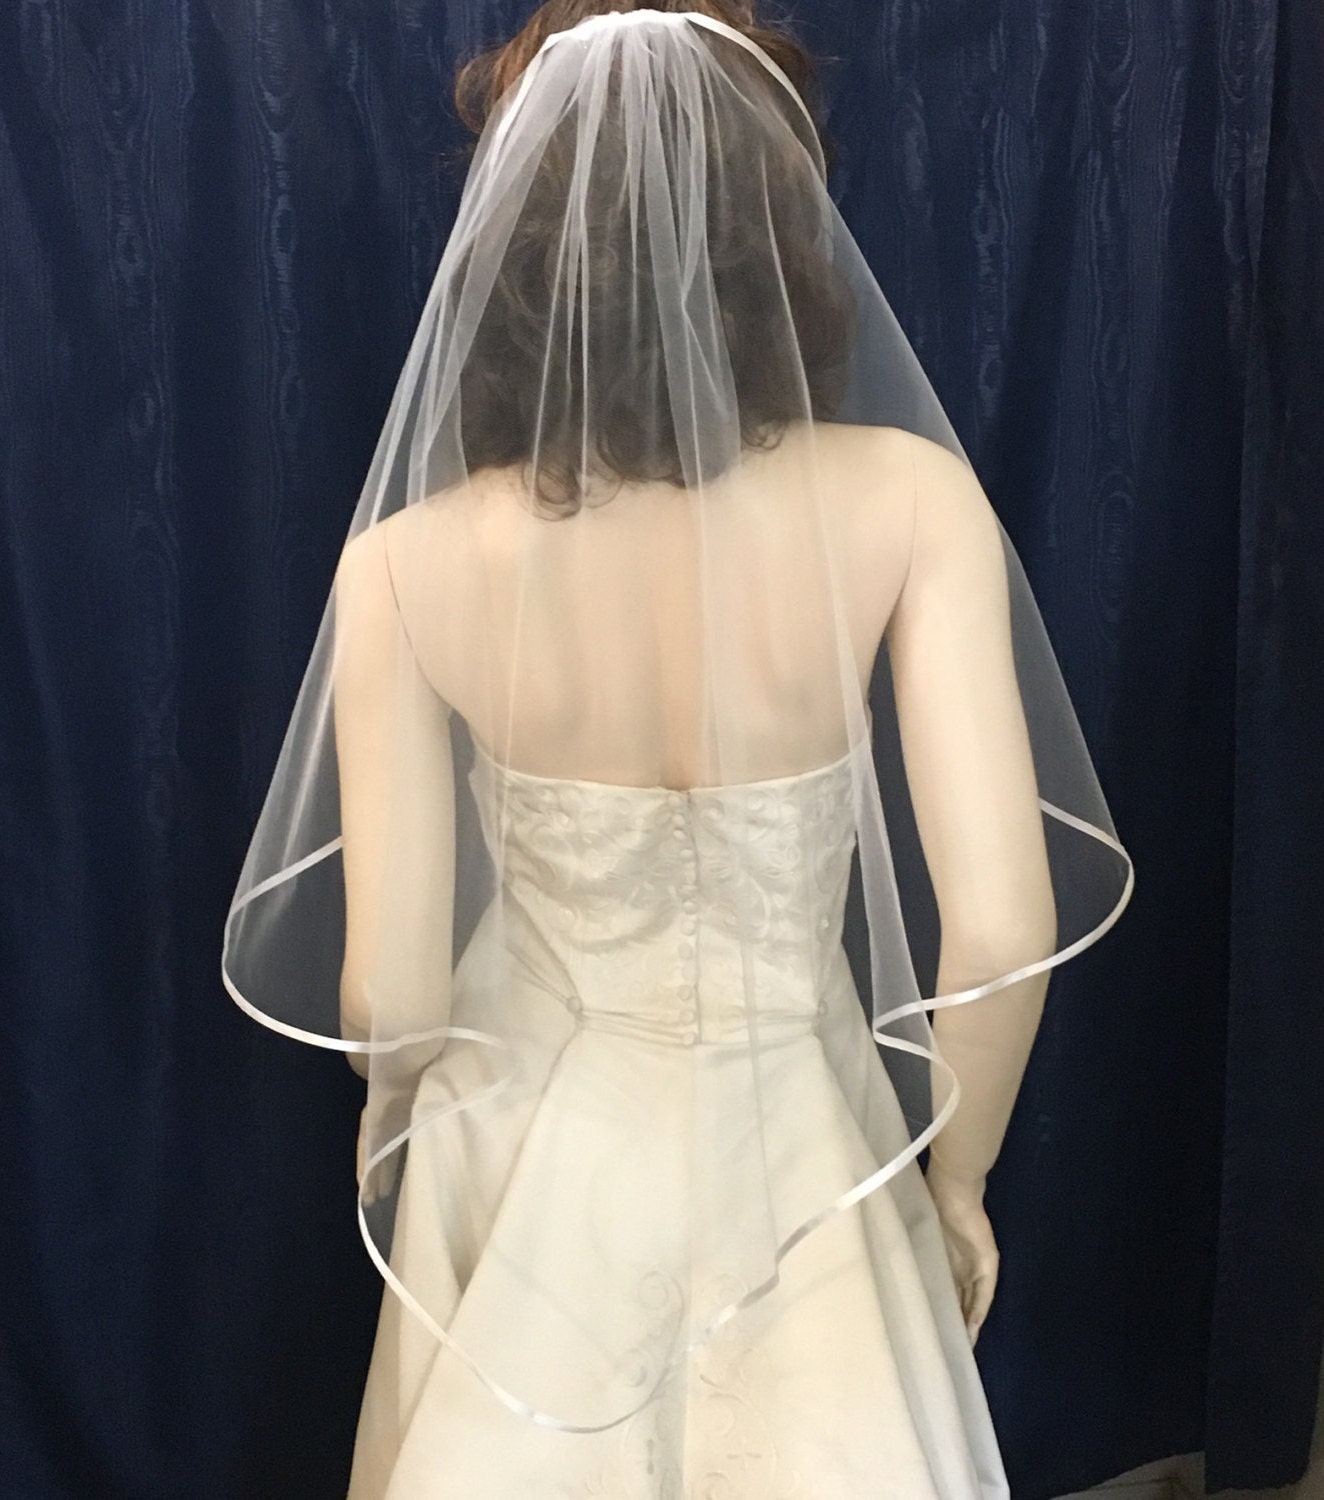 One Tier Tulle Fingertip Veil with Pencil Edge